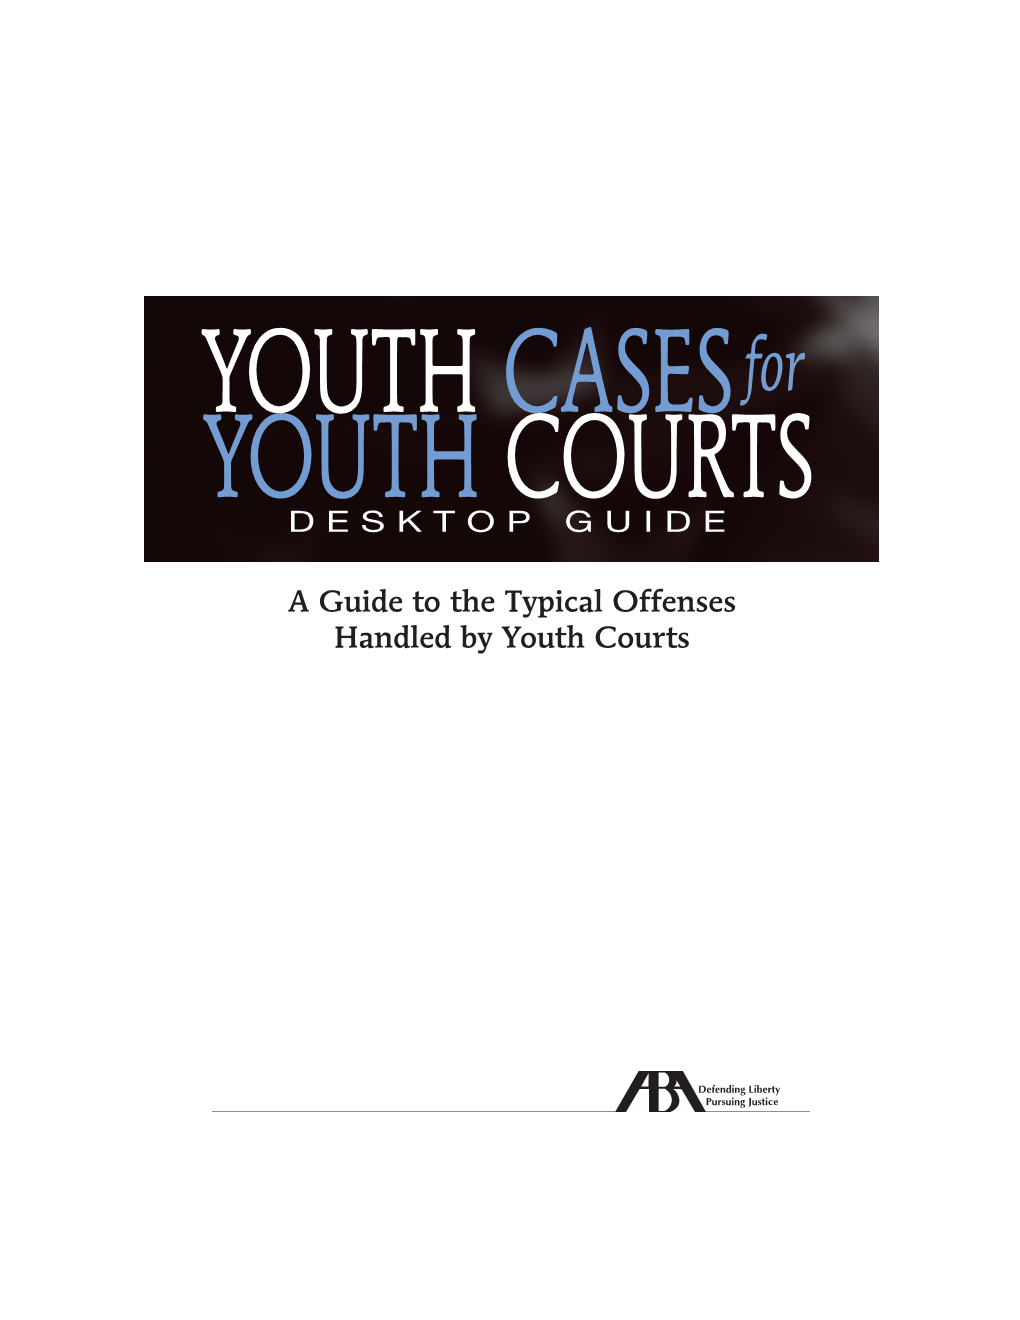 A Guide to the Typical Offenses Handled by Youth Courts a MESSAGE from the UNITED STATES DEPARTMENT of JUSTICE and the AMERICAN BAR ASSOCIATION